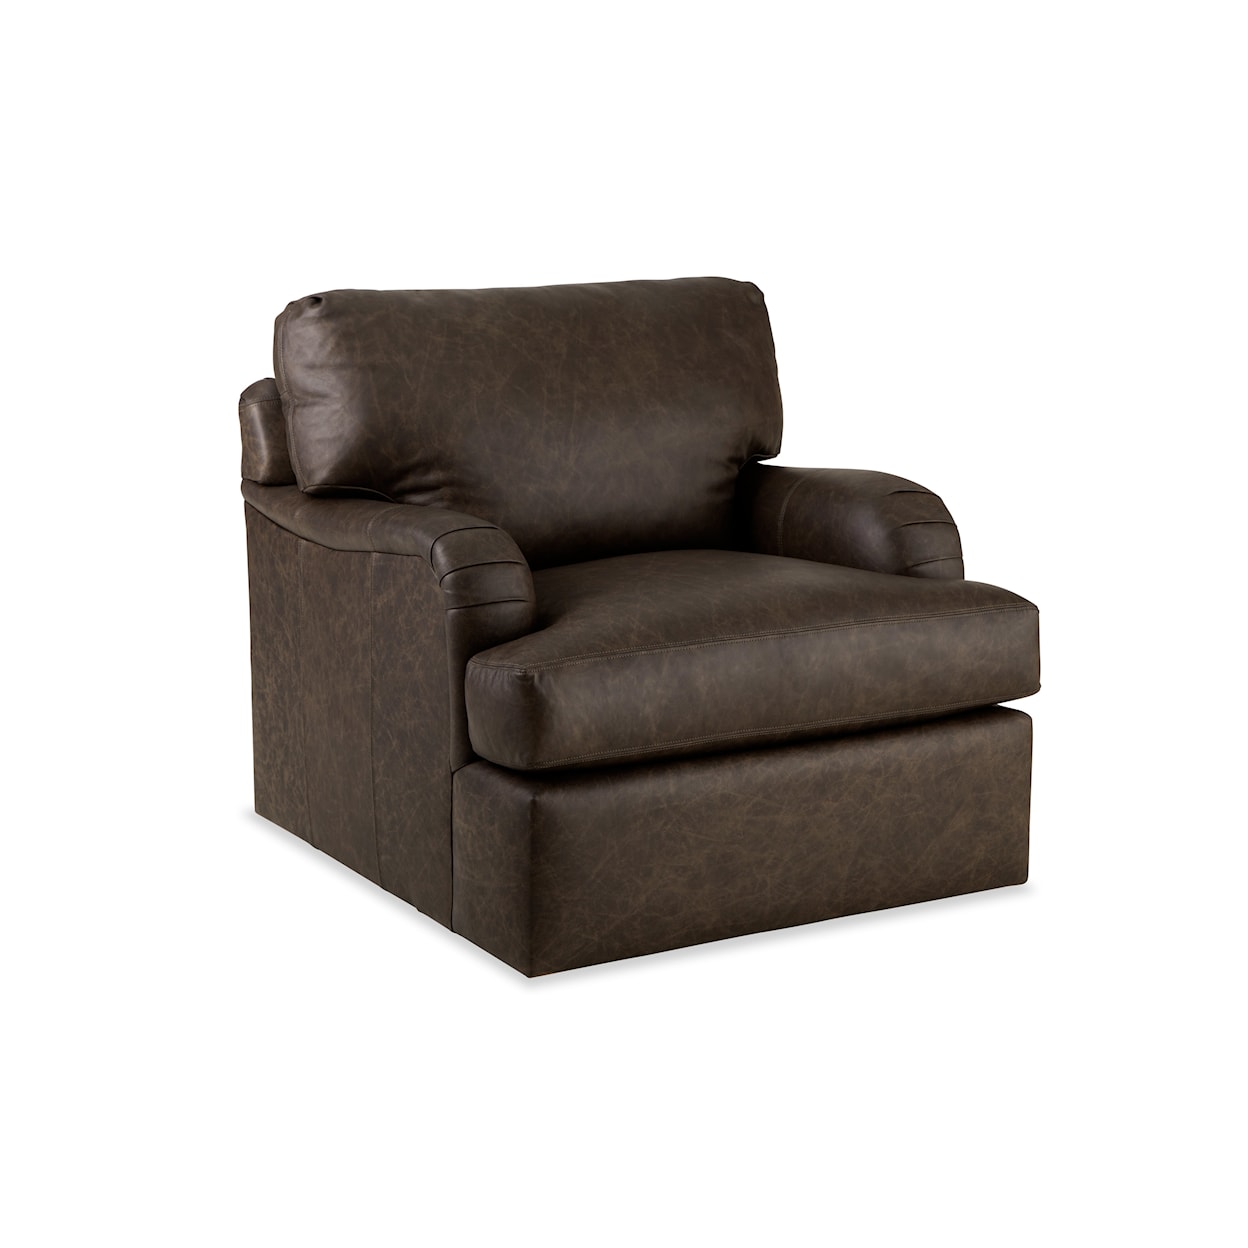 Hickory Craft DESIGN OPTIONS-LC9 Swivel Chair